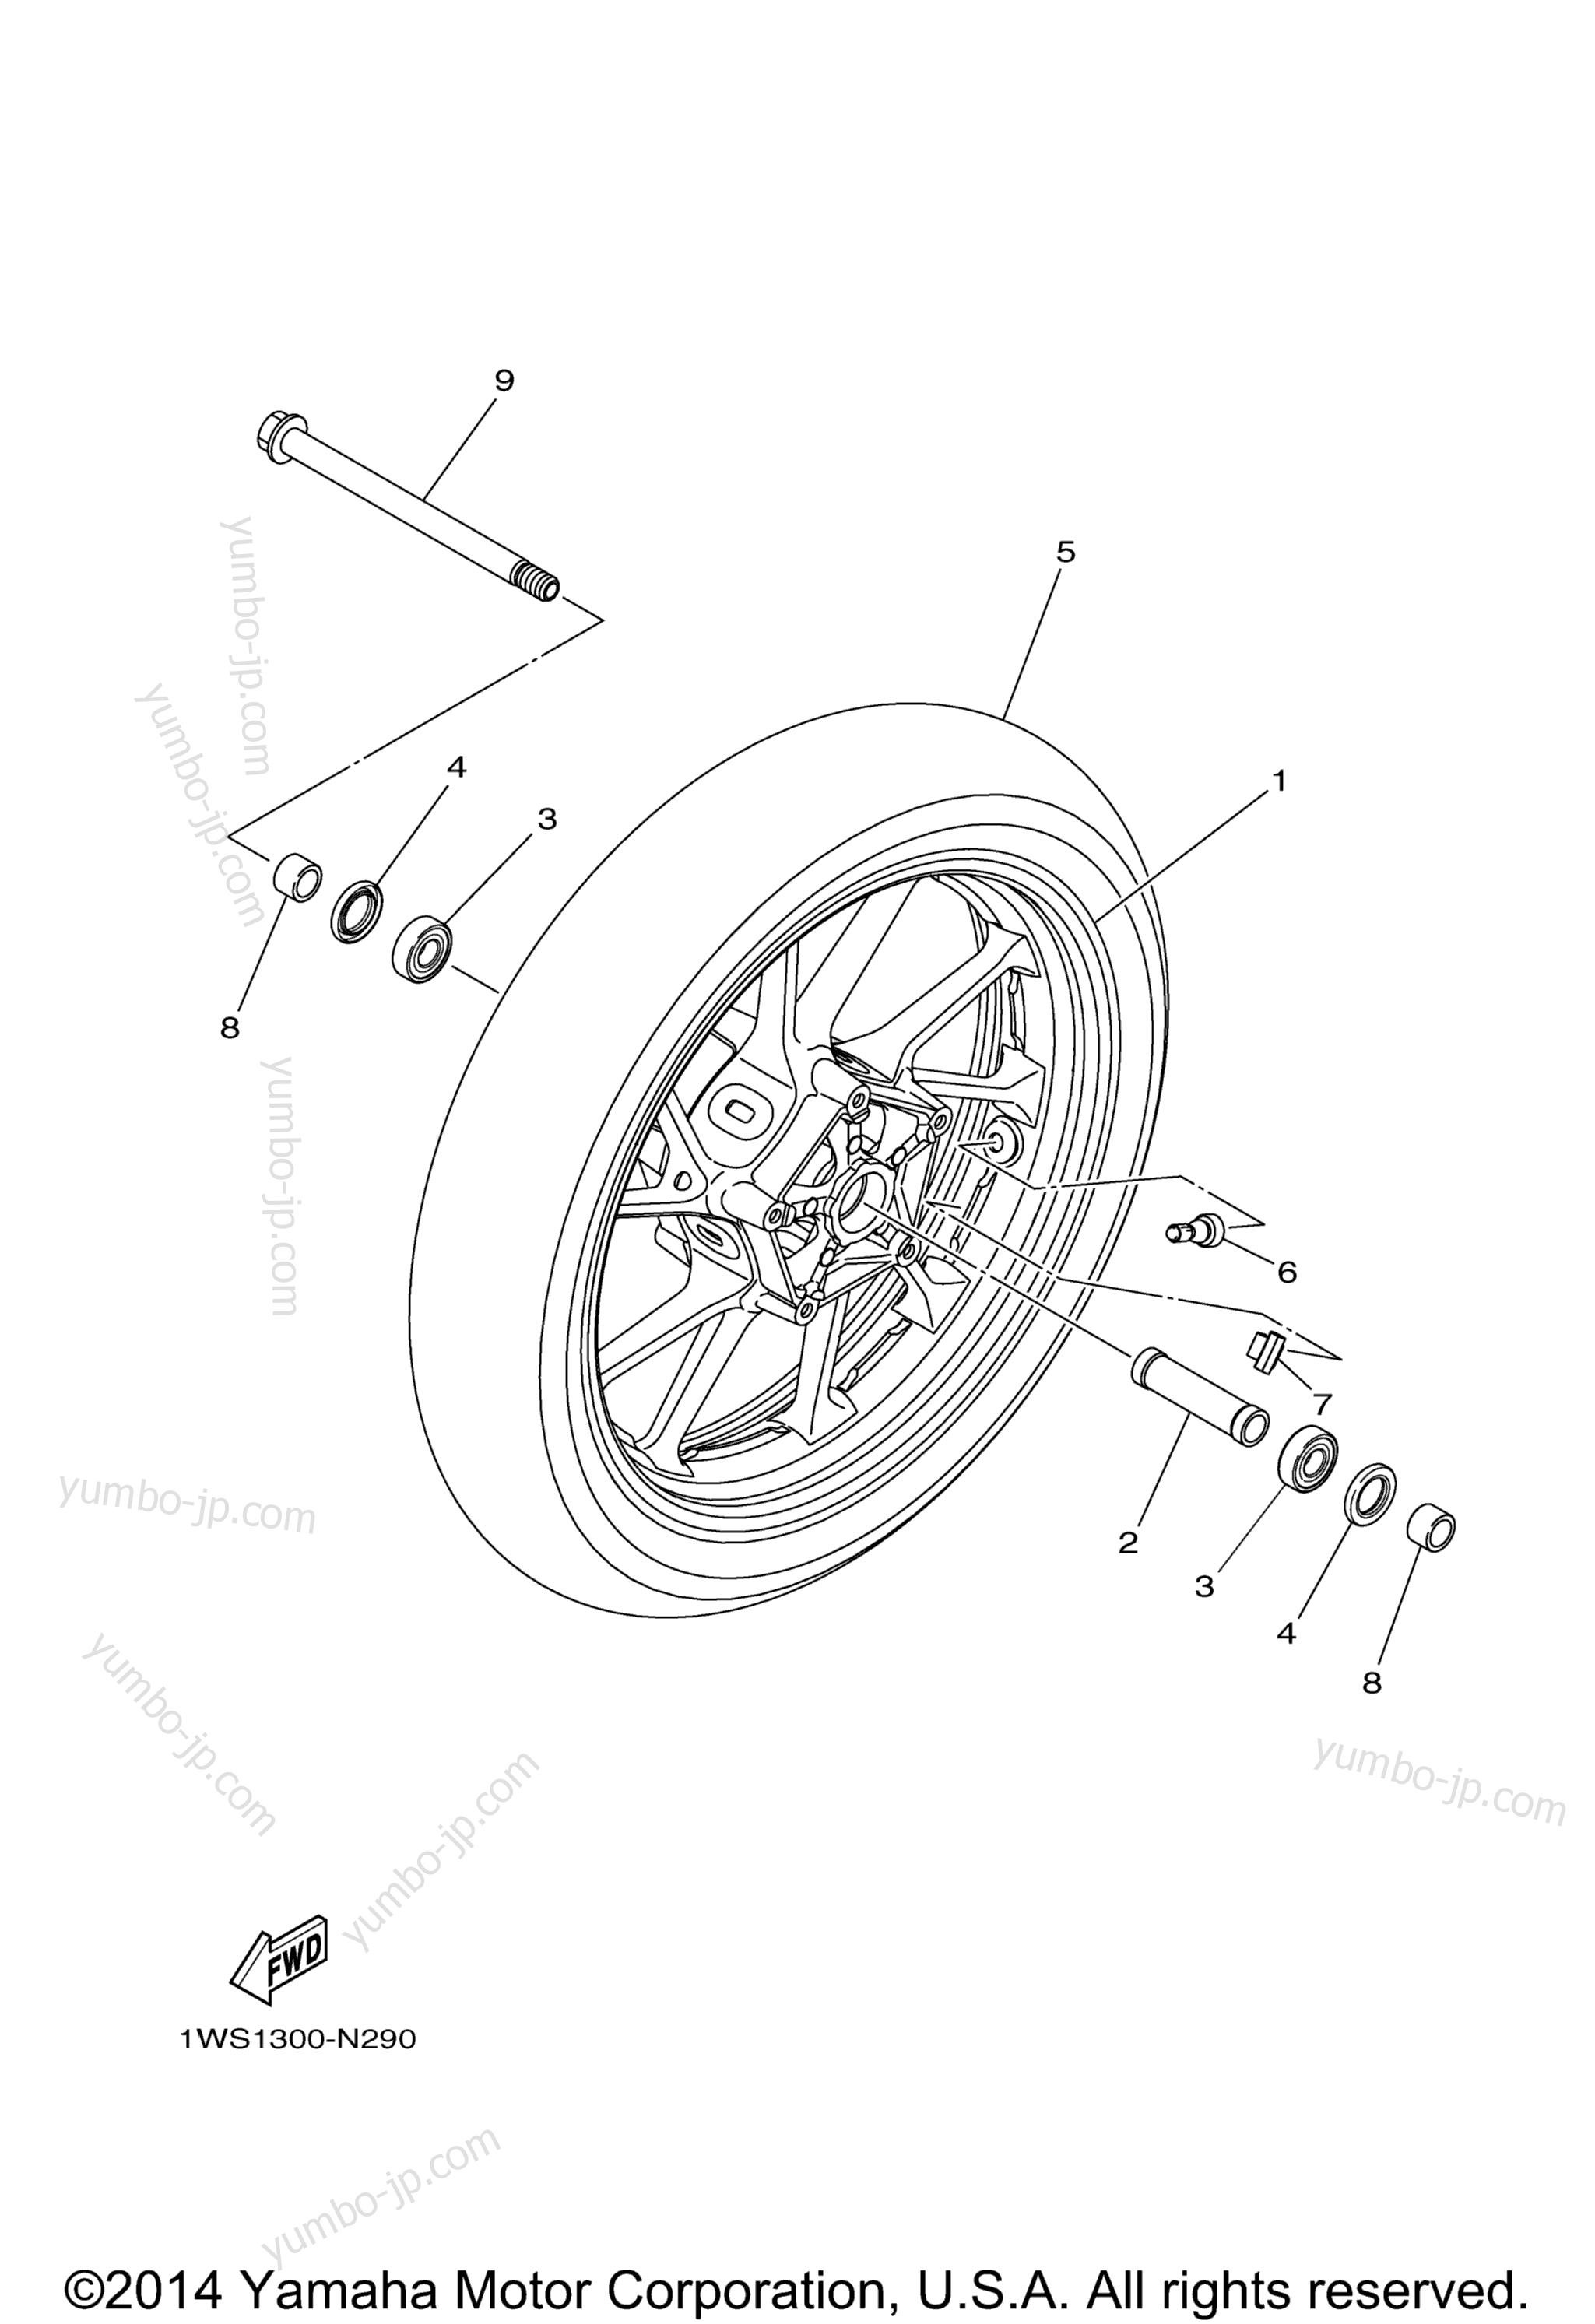 FRONT WHEEL for motorcycles YAMAHA FZ07 (FZ07FW) 2015 year